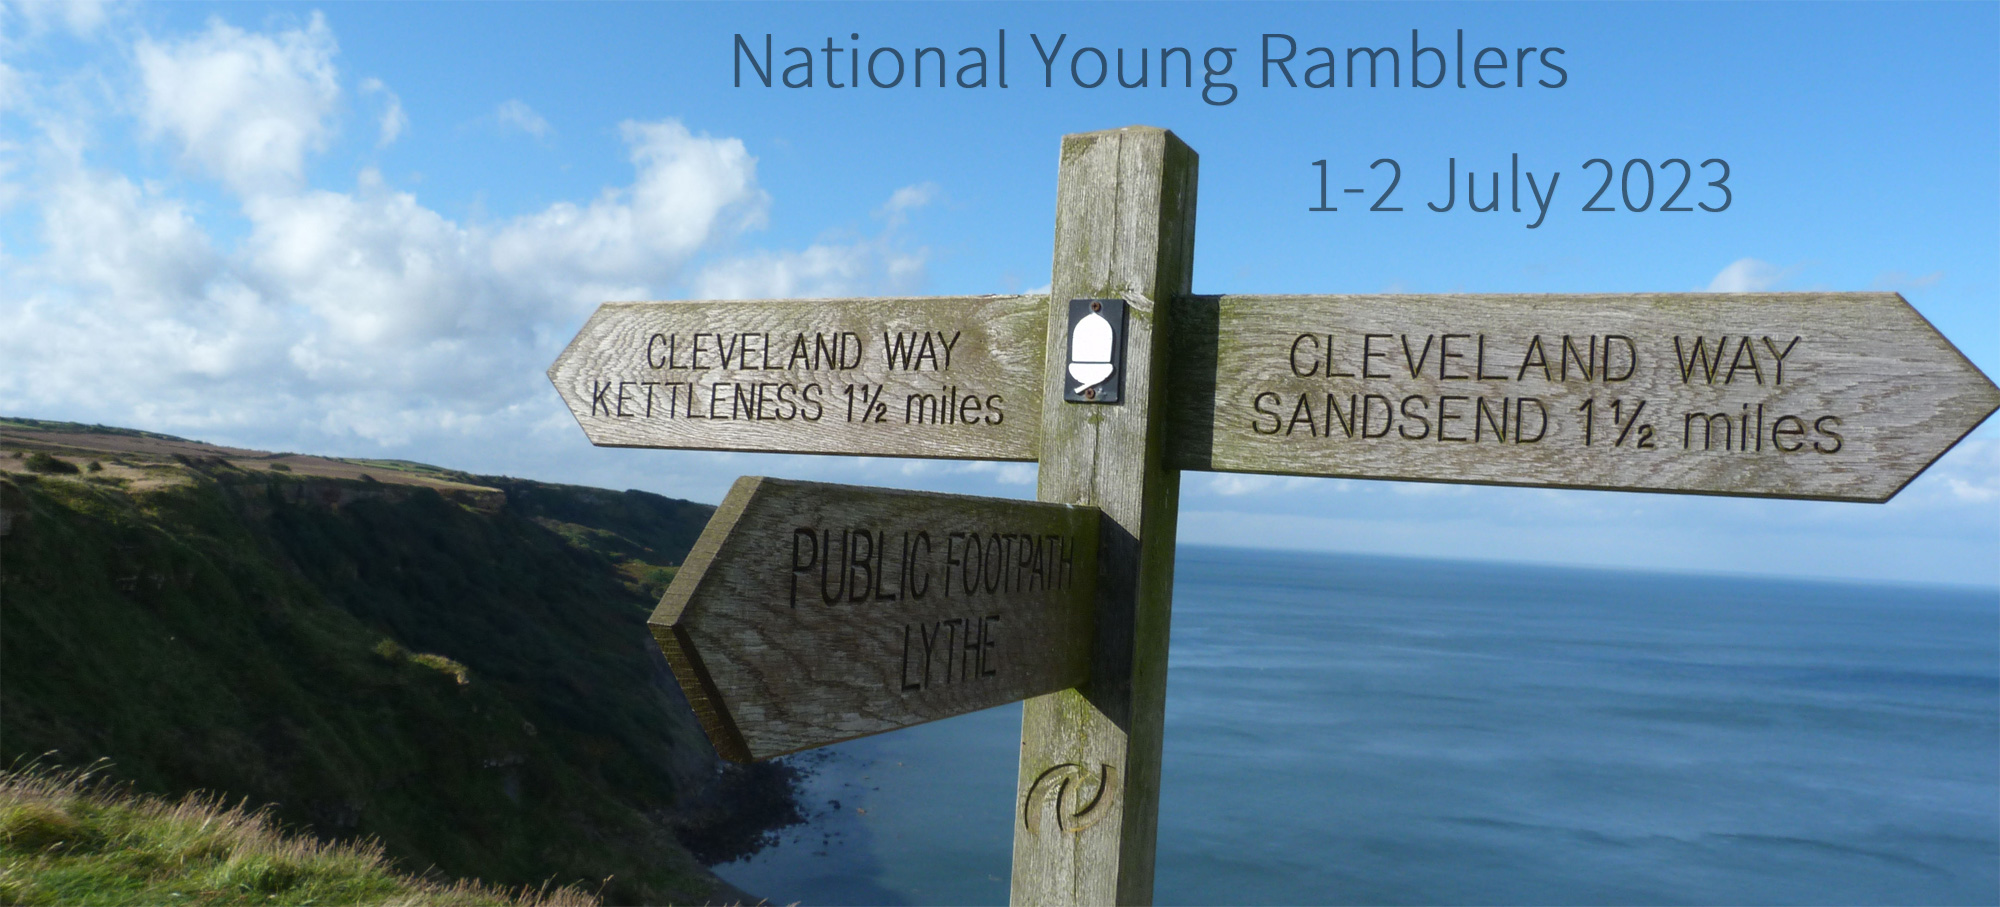 National Young Ramblers